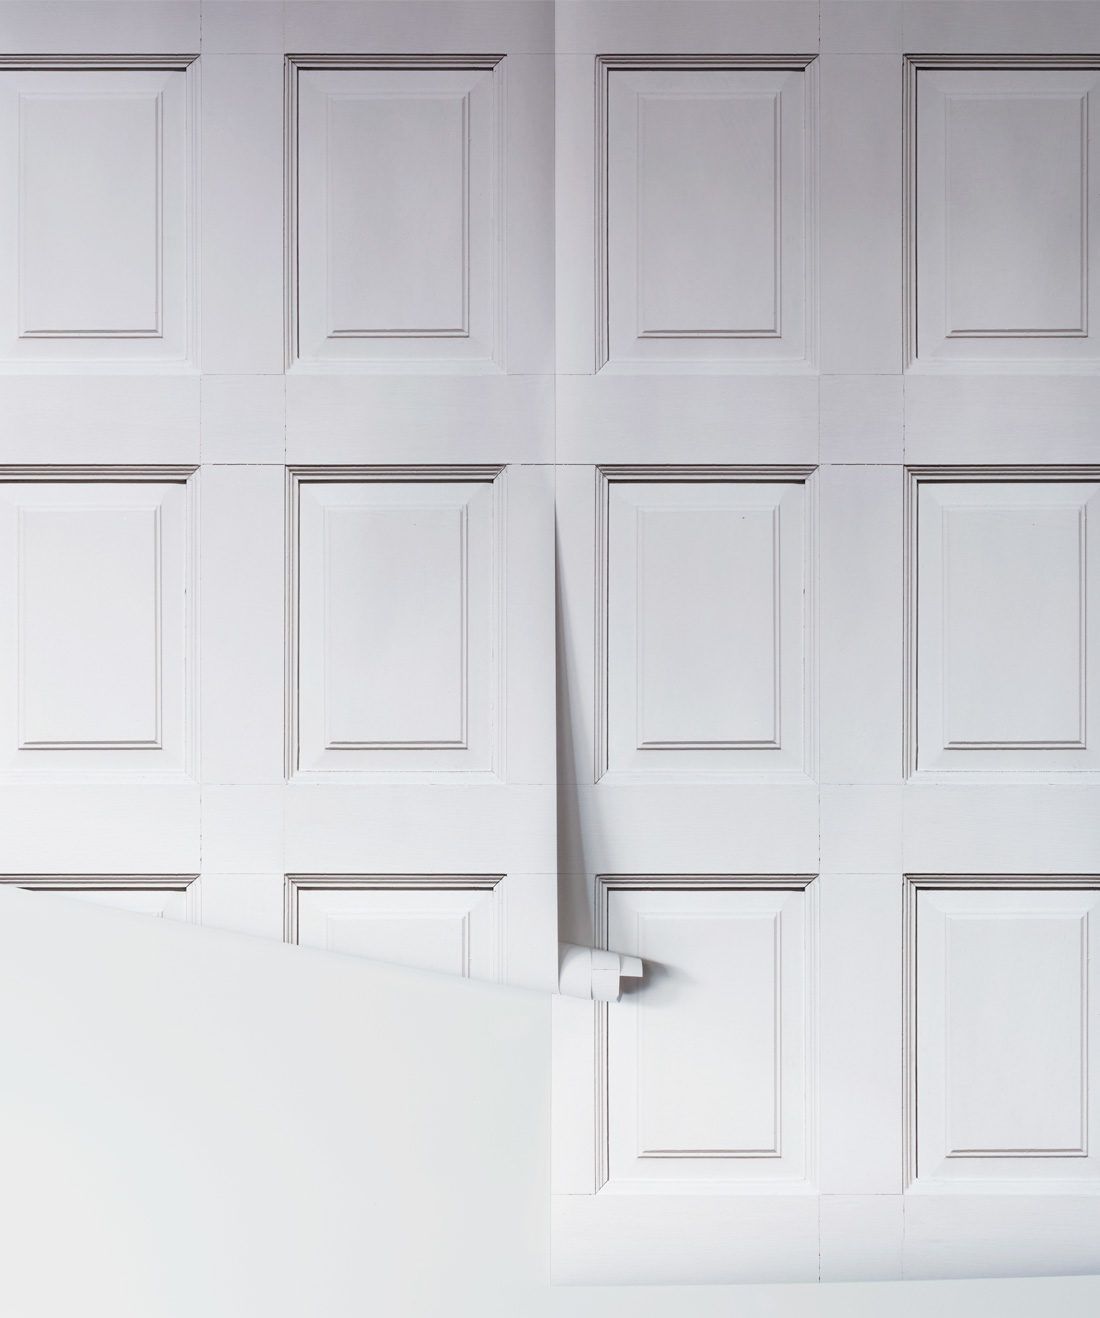 Geometric Wood Shapes and Wainscoting Might be the Next Big Wall Coverings  Trend  Apartment Therapy